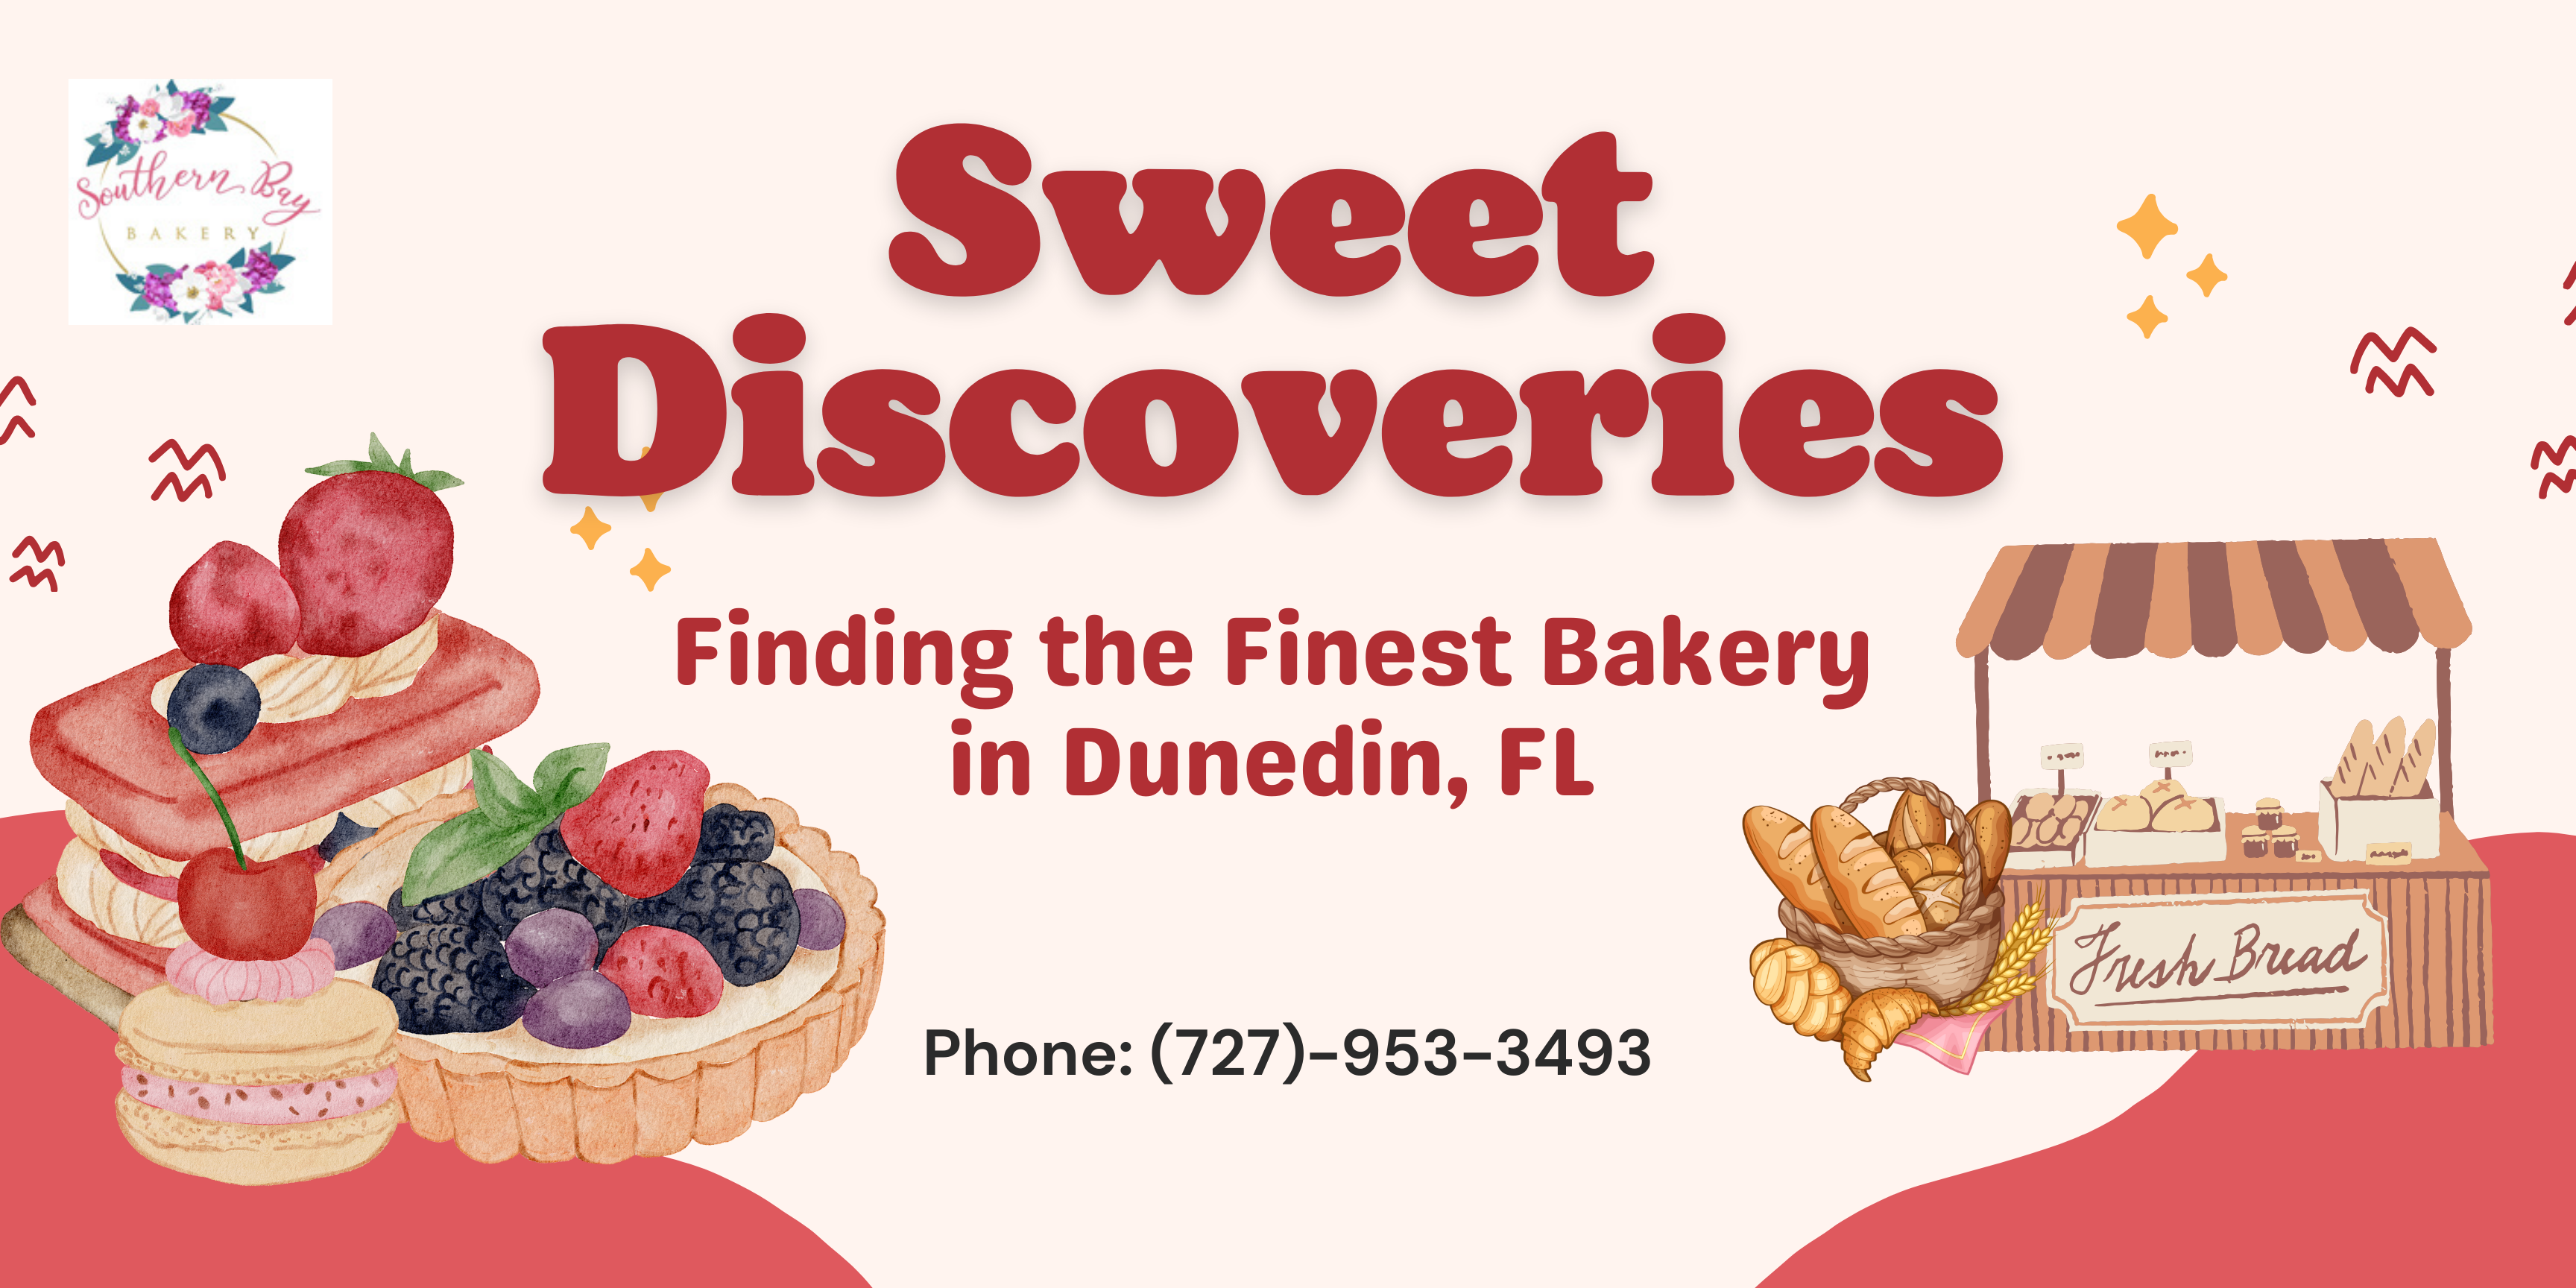 Sweet Discoveries: Finding the Finest Bakery in Dunedin, FL